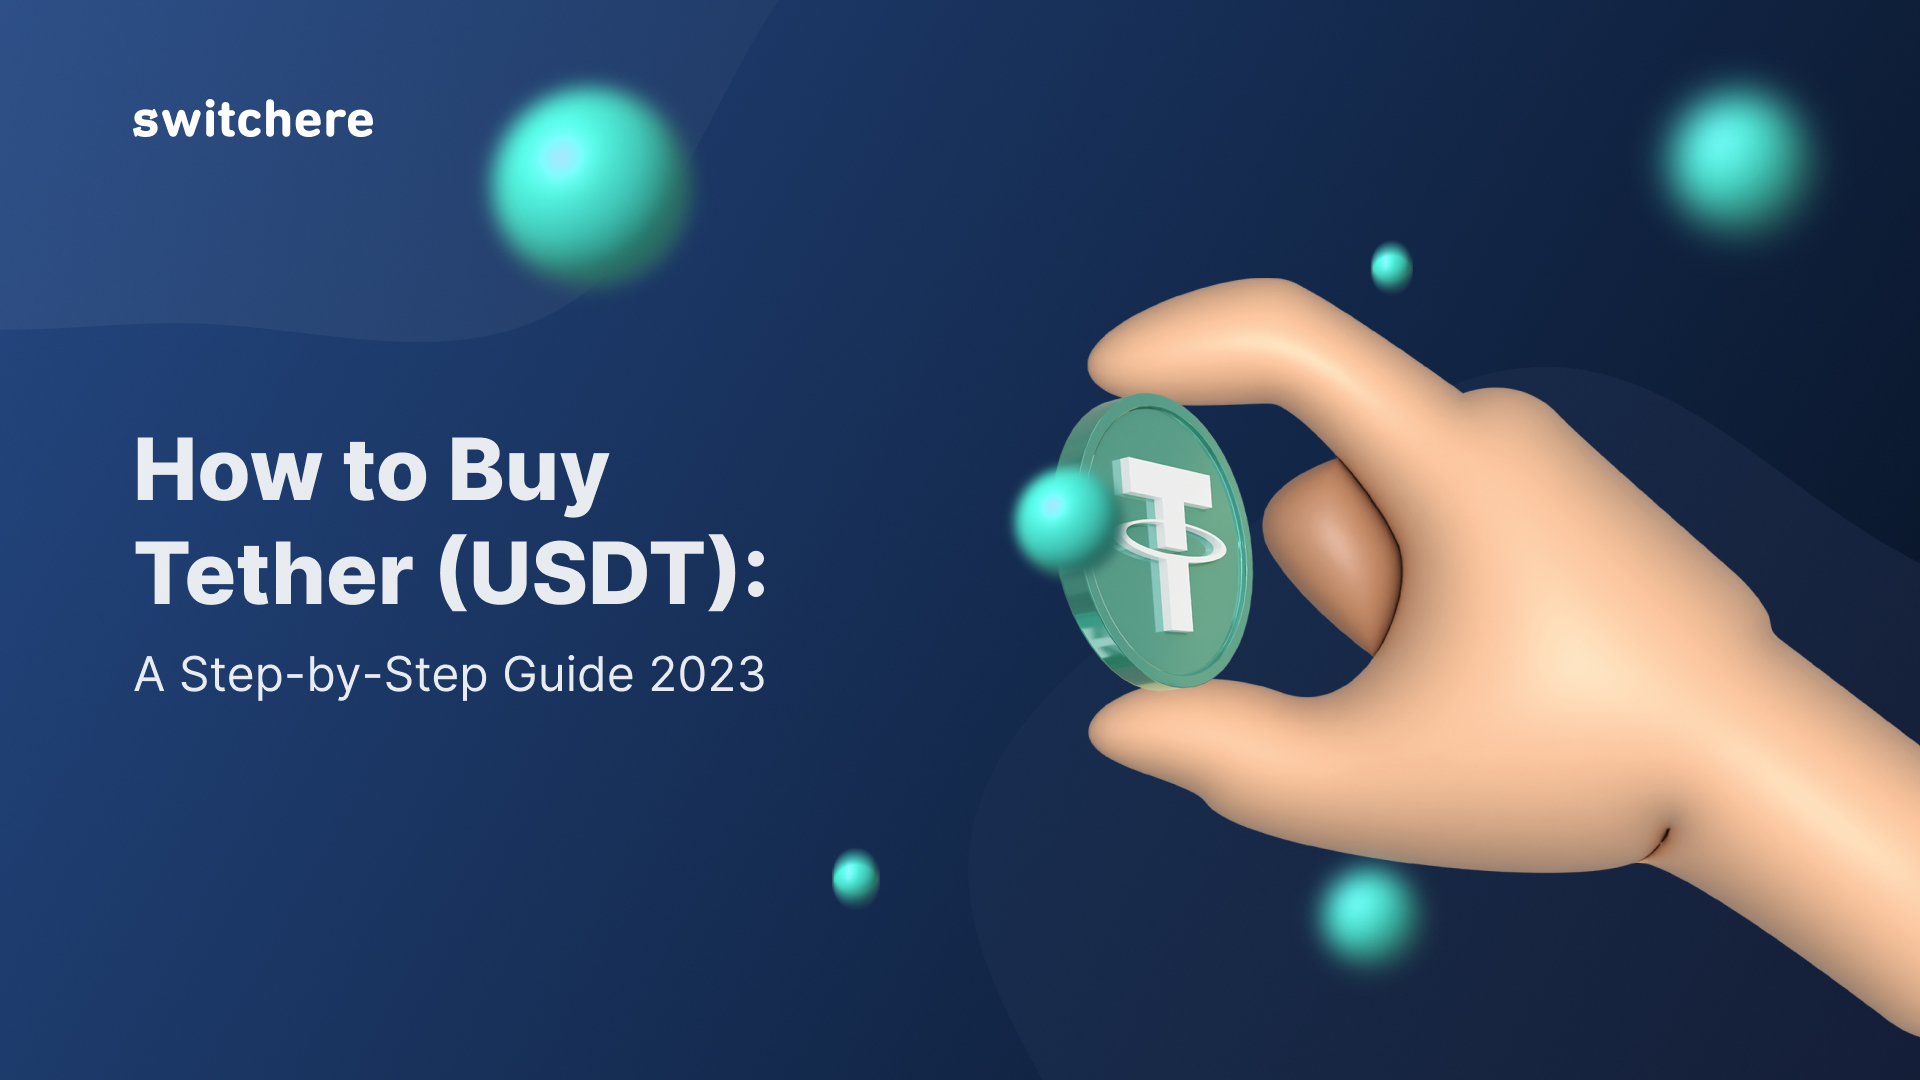 How to Buy Tether (USDT): A Step-by-Step Guide 2023